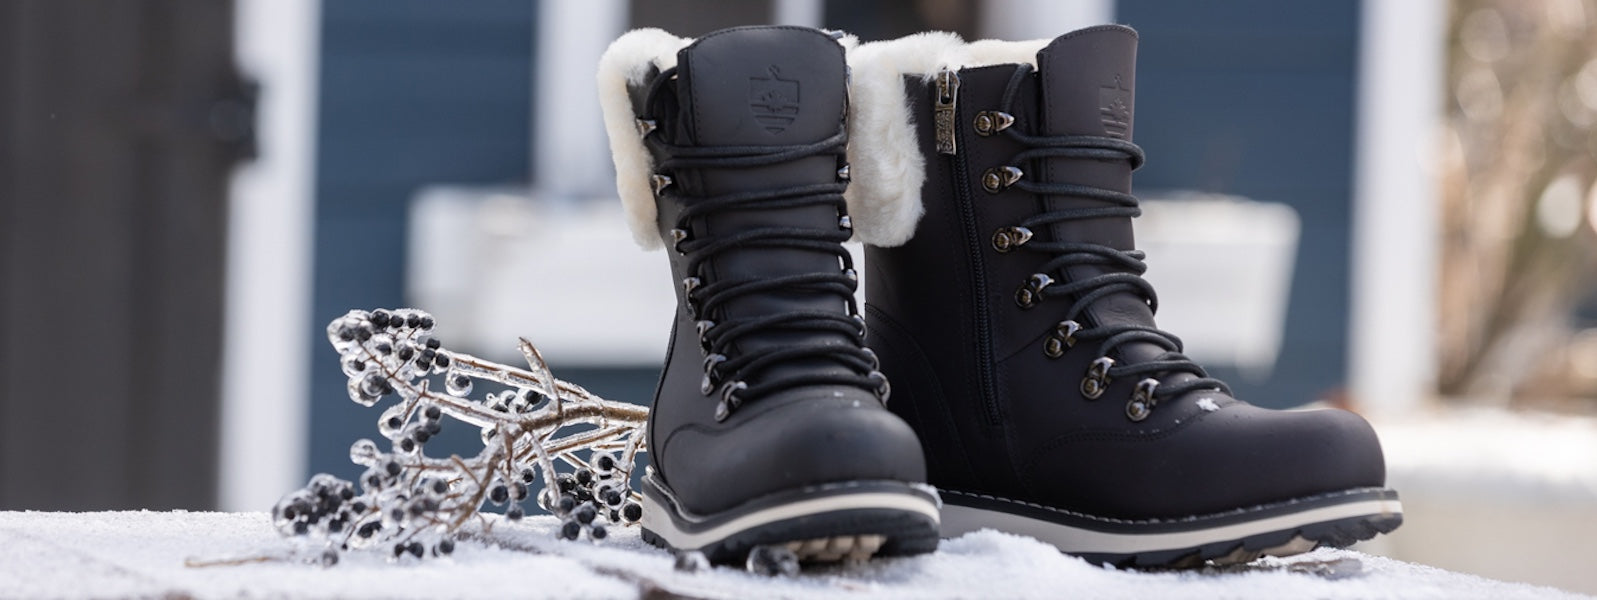 Cambridge All Black Winter Boots for Women in the Snow